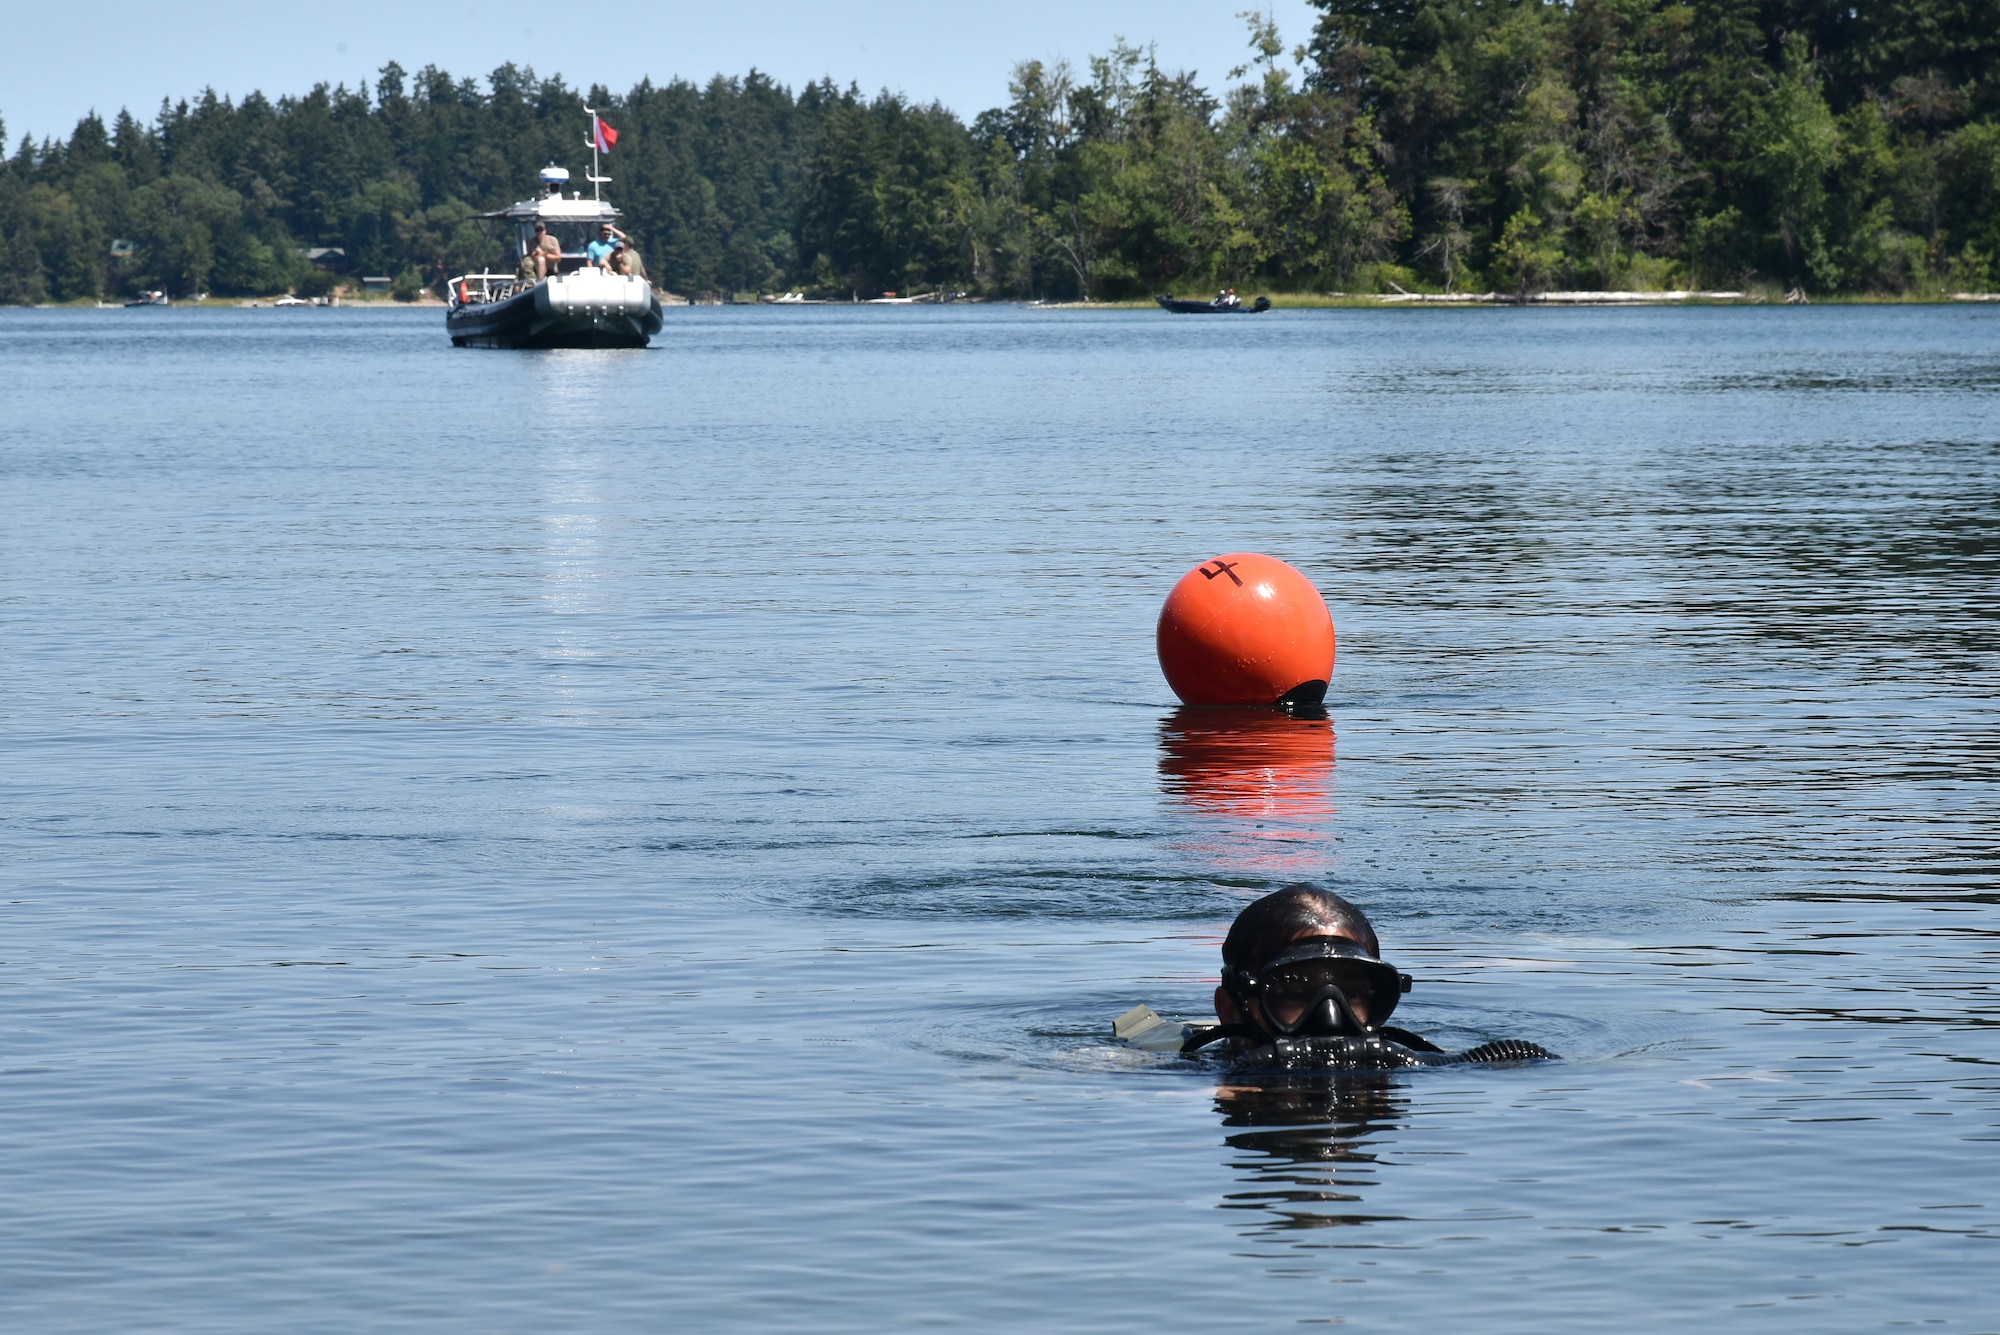 U.S. Air Force 125th Special Tactics Airmen from the Portland Air National Guard Base, along with members of joint forces, participate in closed-circuit dive training at Joint Base Lewis McChord, Wash., July 31, 2020.  Special Tactics operators were conducted dives and training on new equipment.